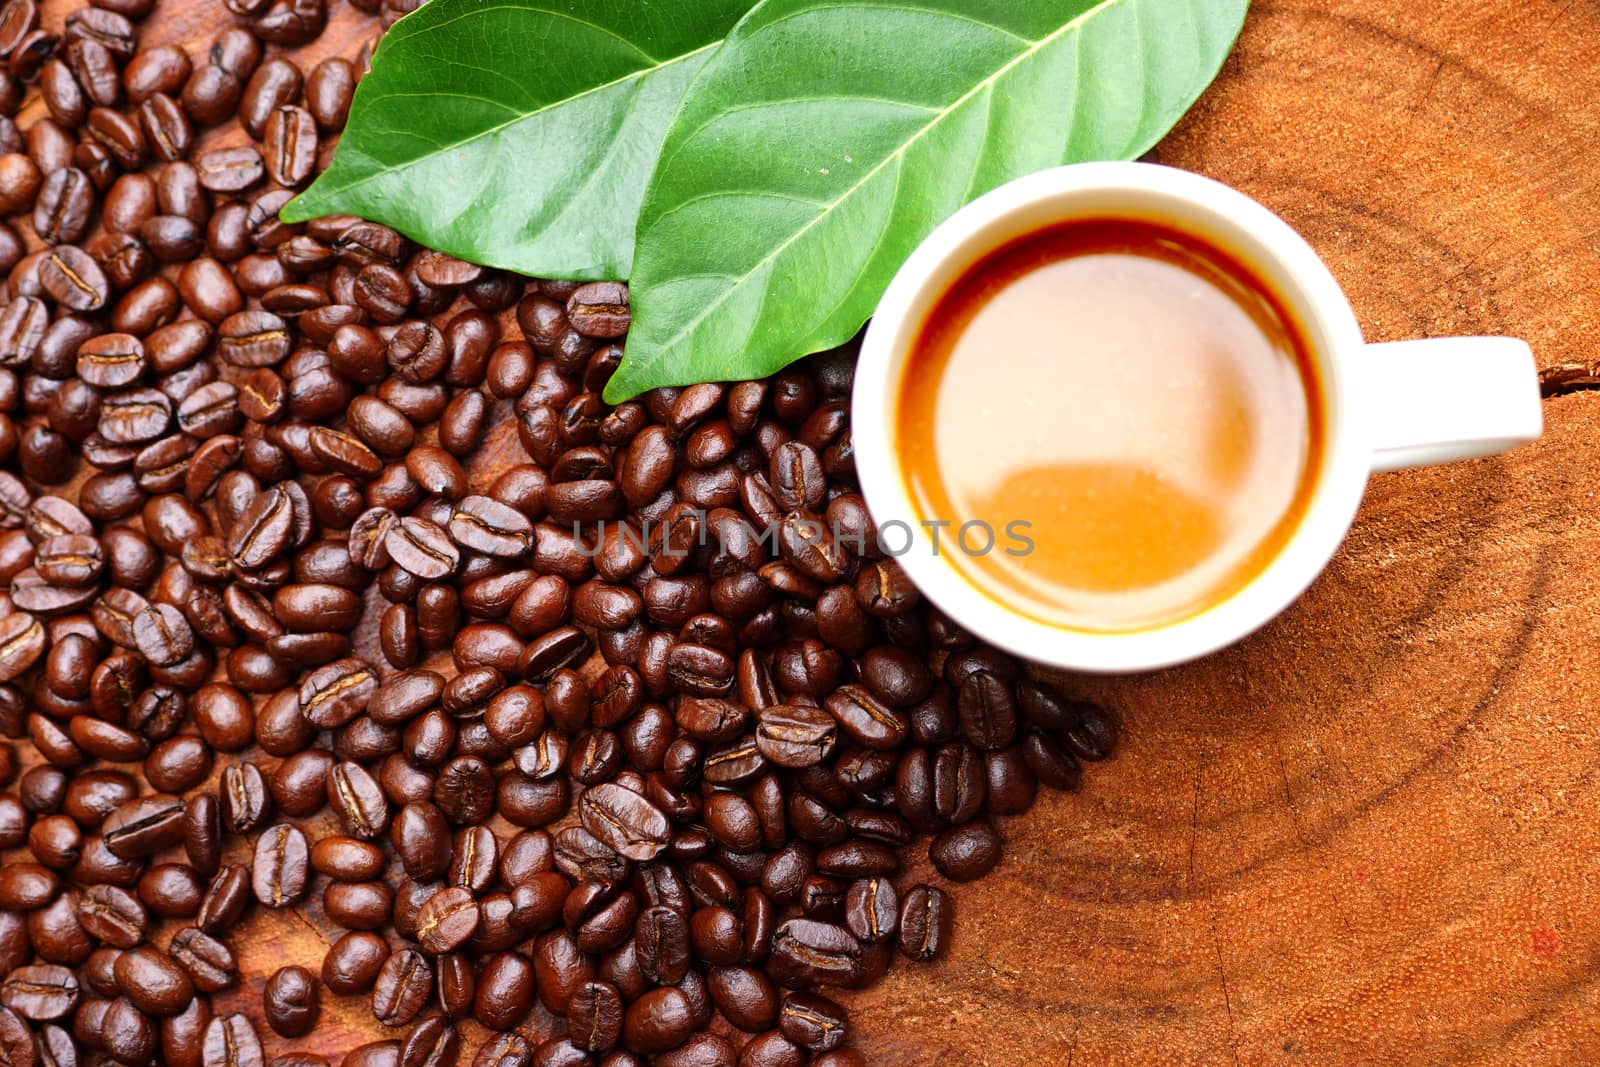 Coffee beans on the wooden background.